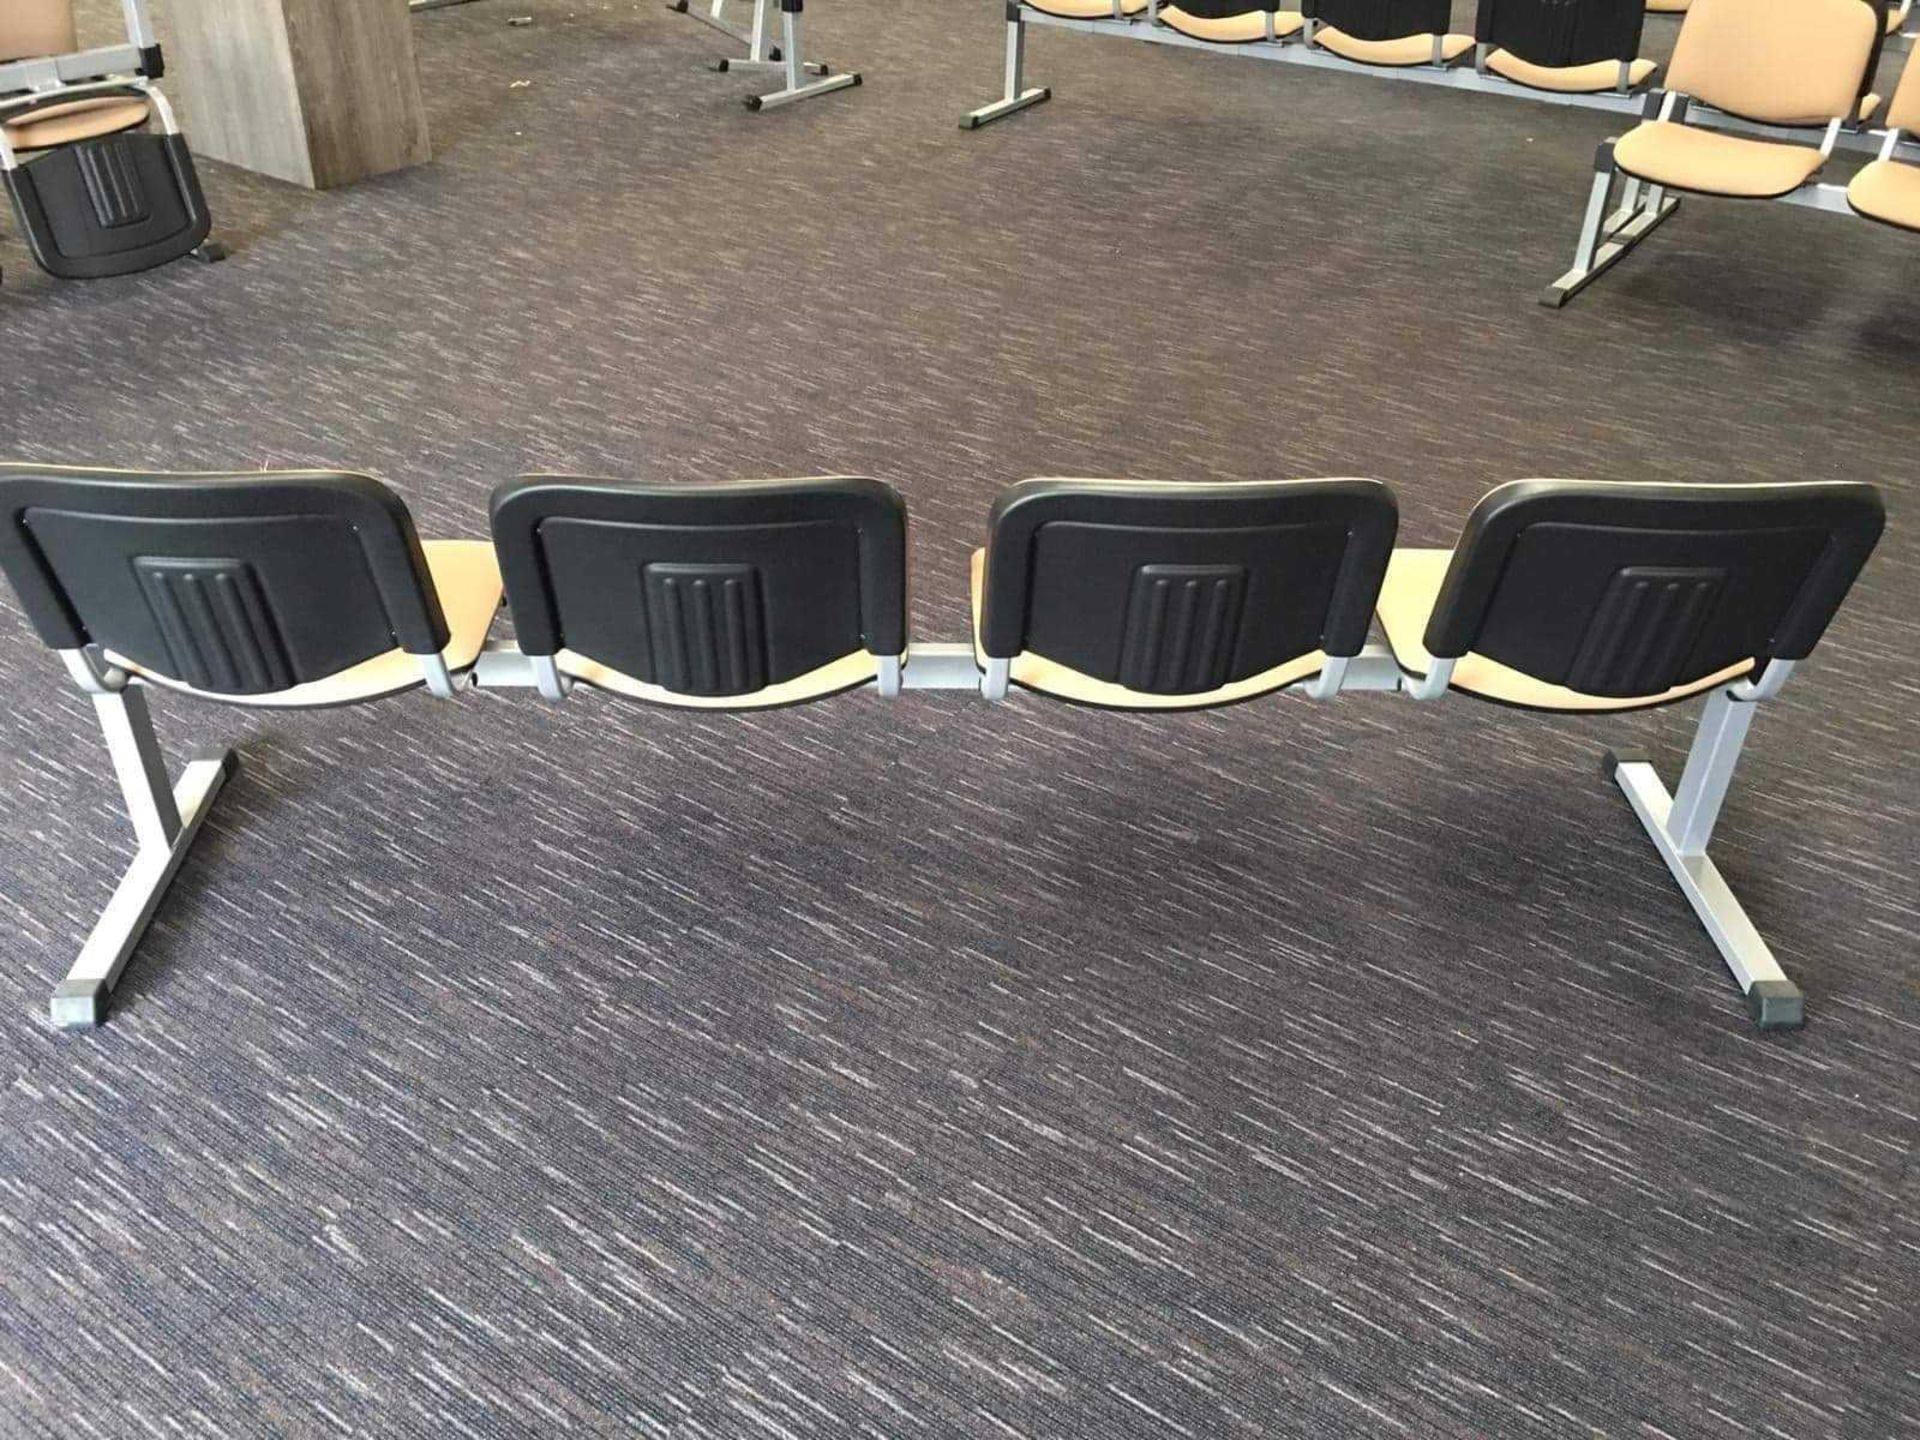 10 sets of 4 waiting chairs - Image 3 of 7